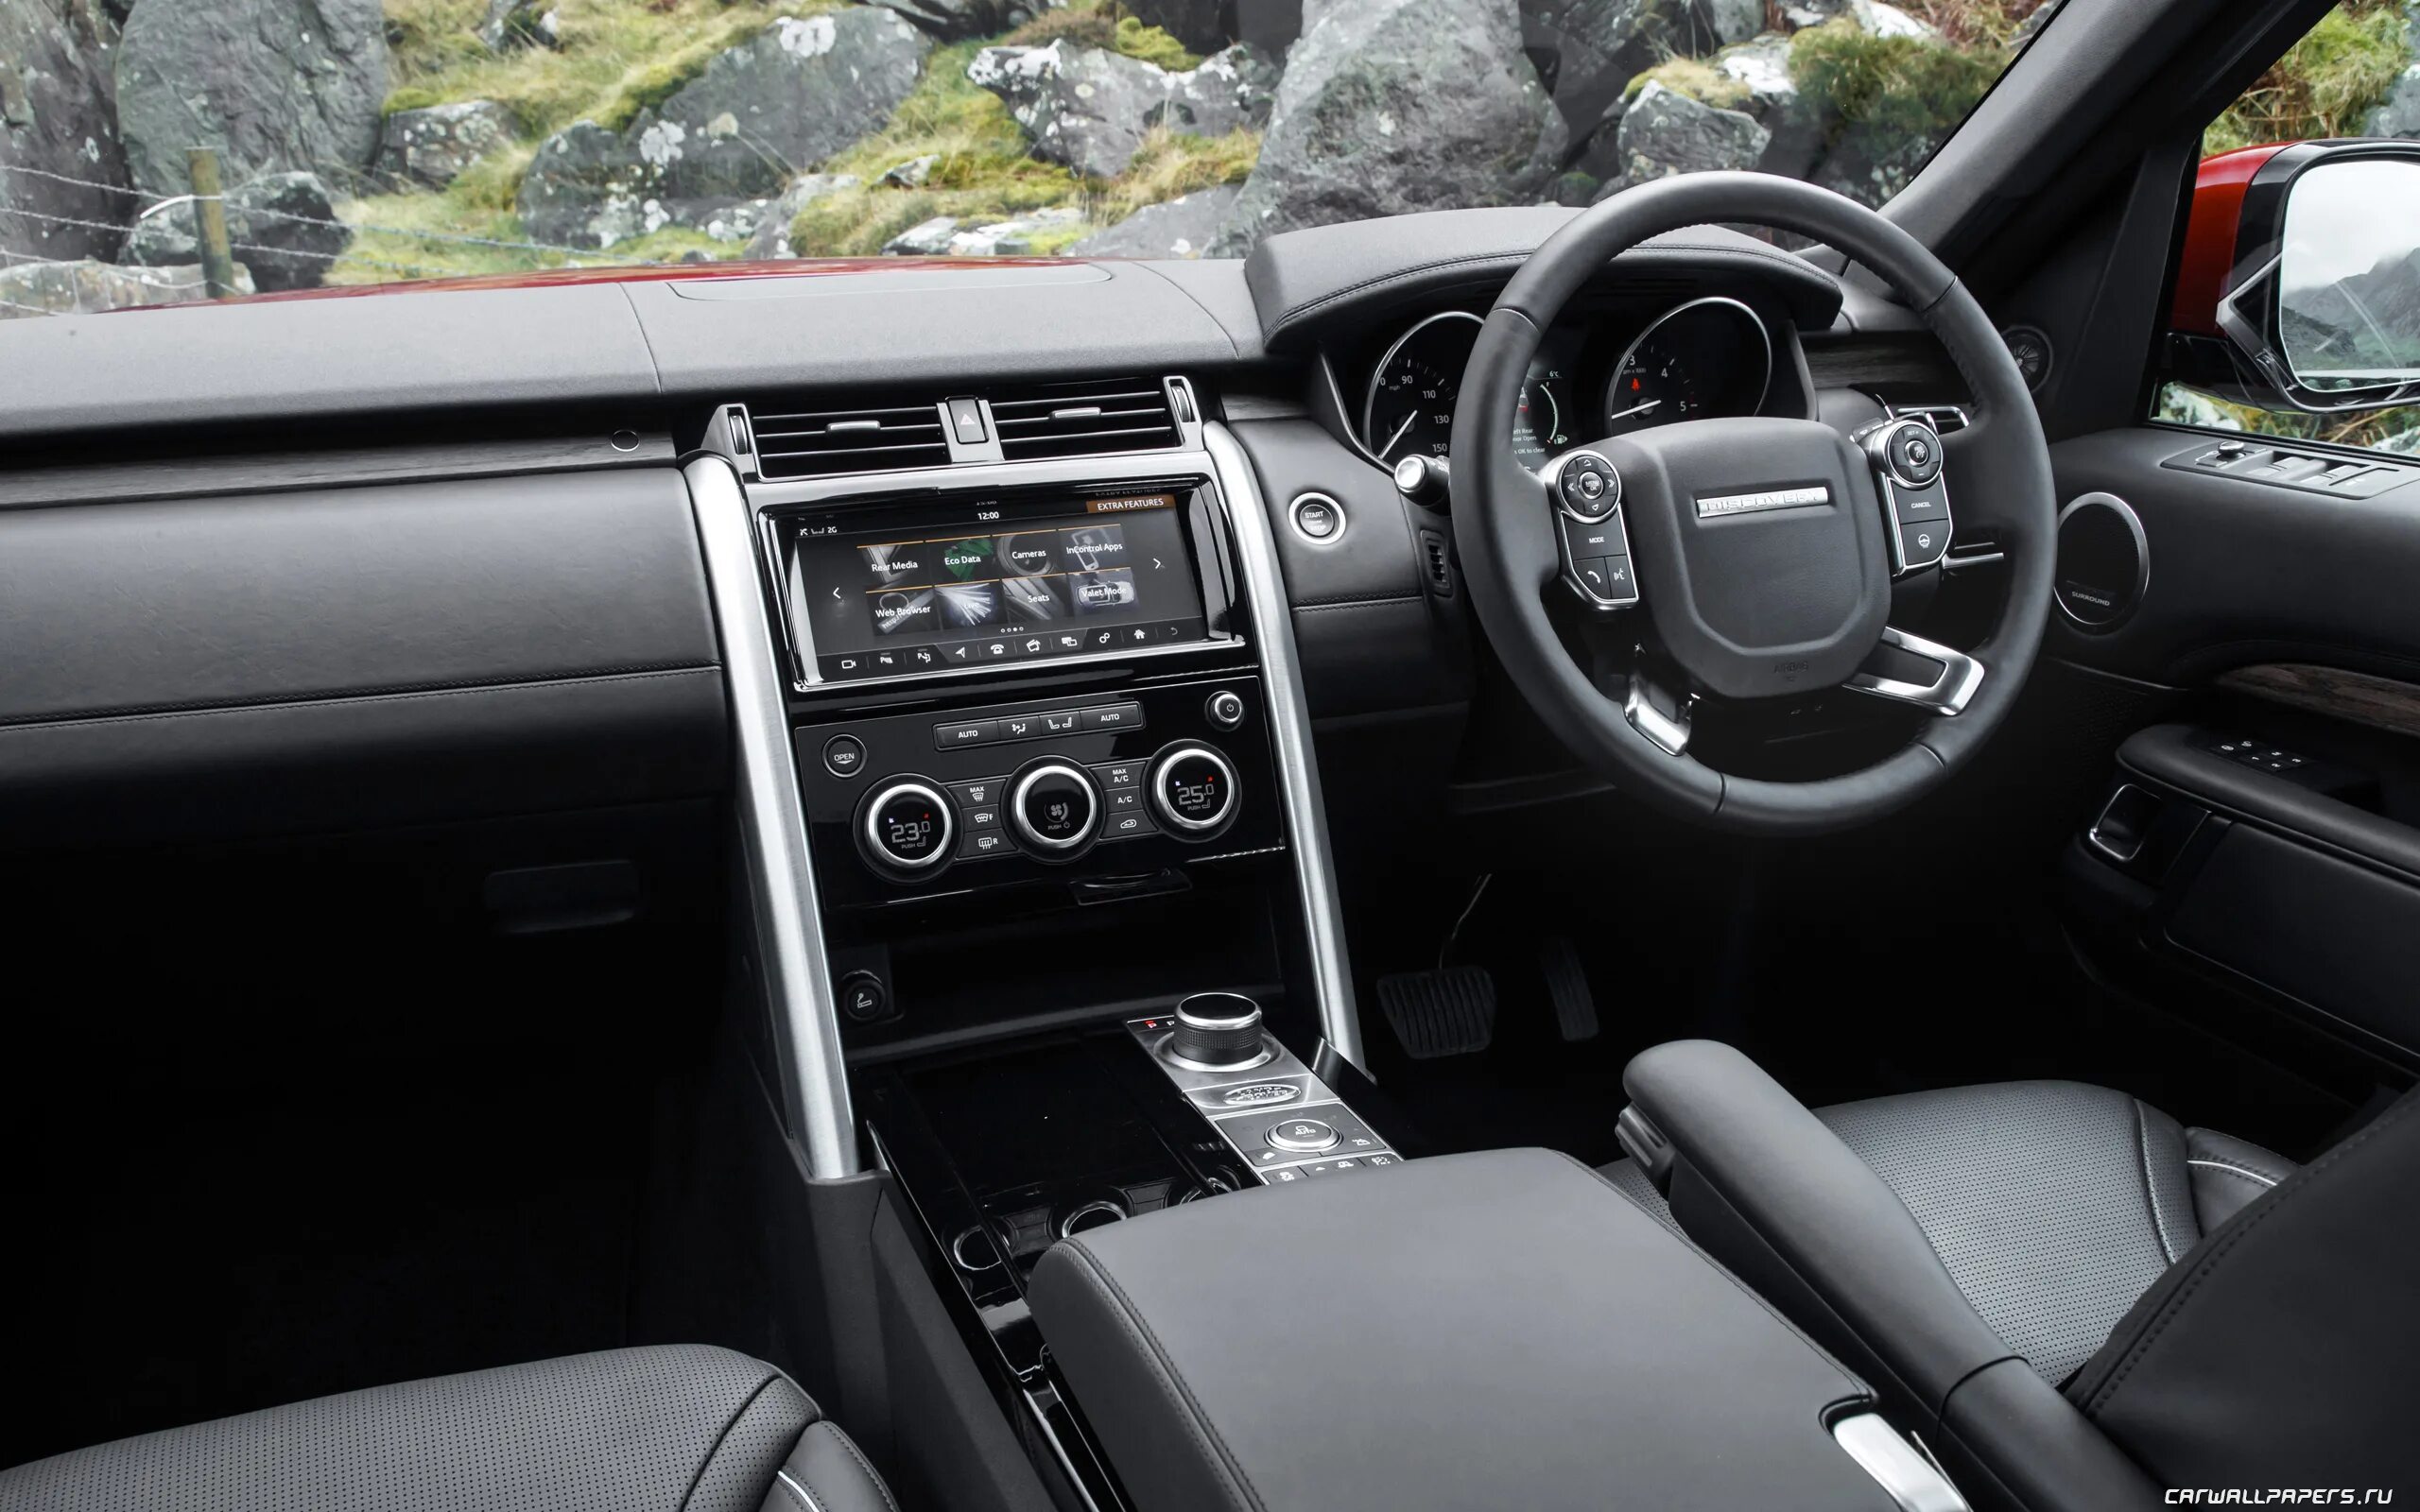 Land Rover Discovery 2018. Land Rover Discovery 2017 Interior. Land Rover Discovery 5 2023. Рендж Ровер Дискавери 2018. Дискавери 2018